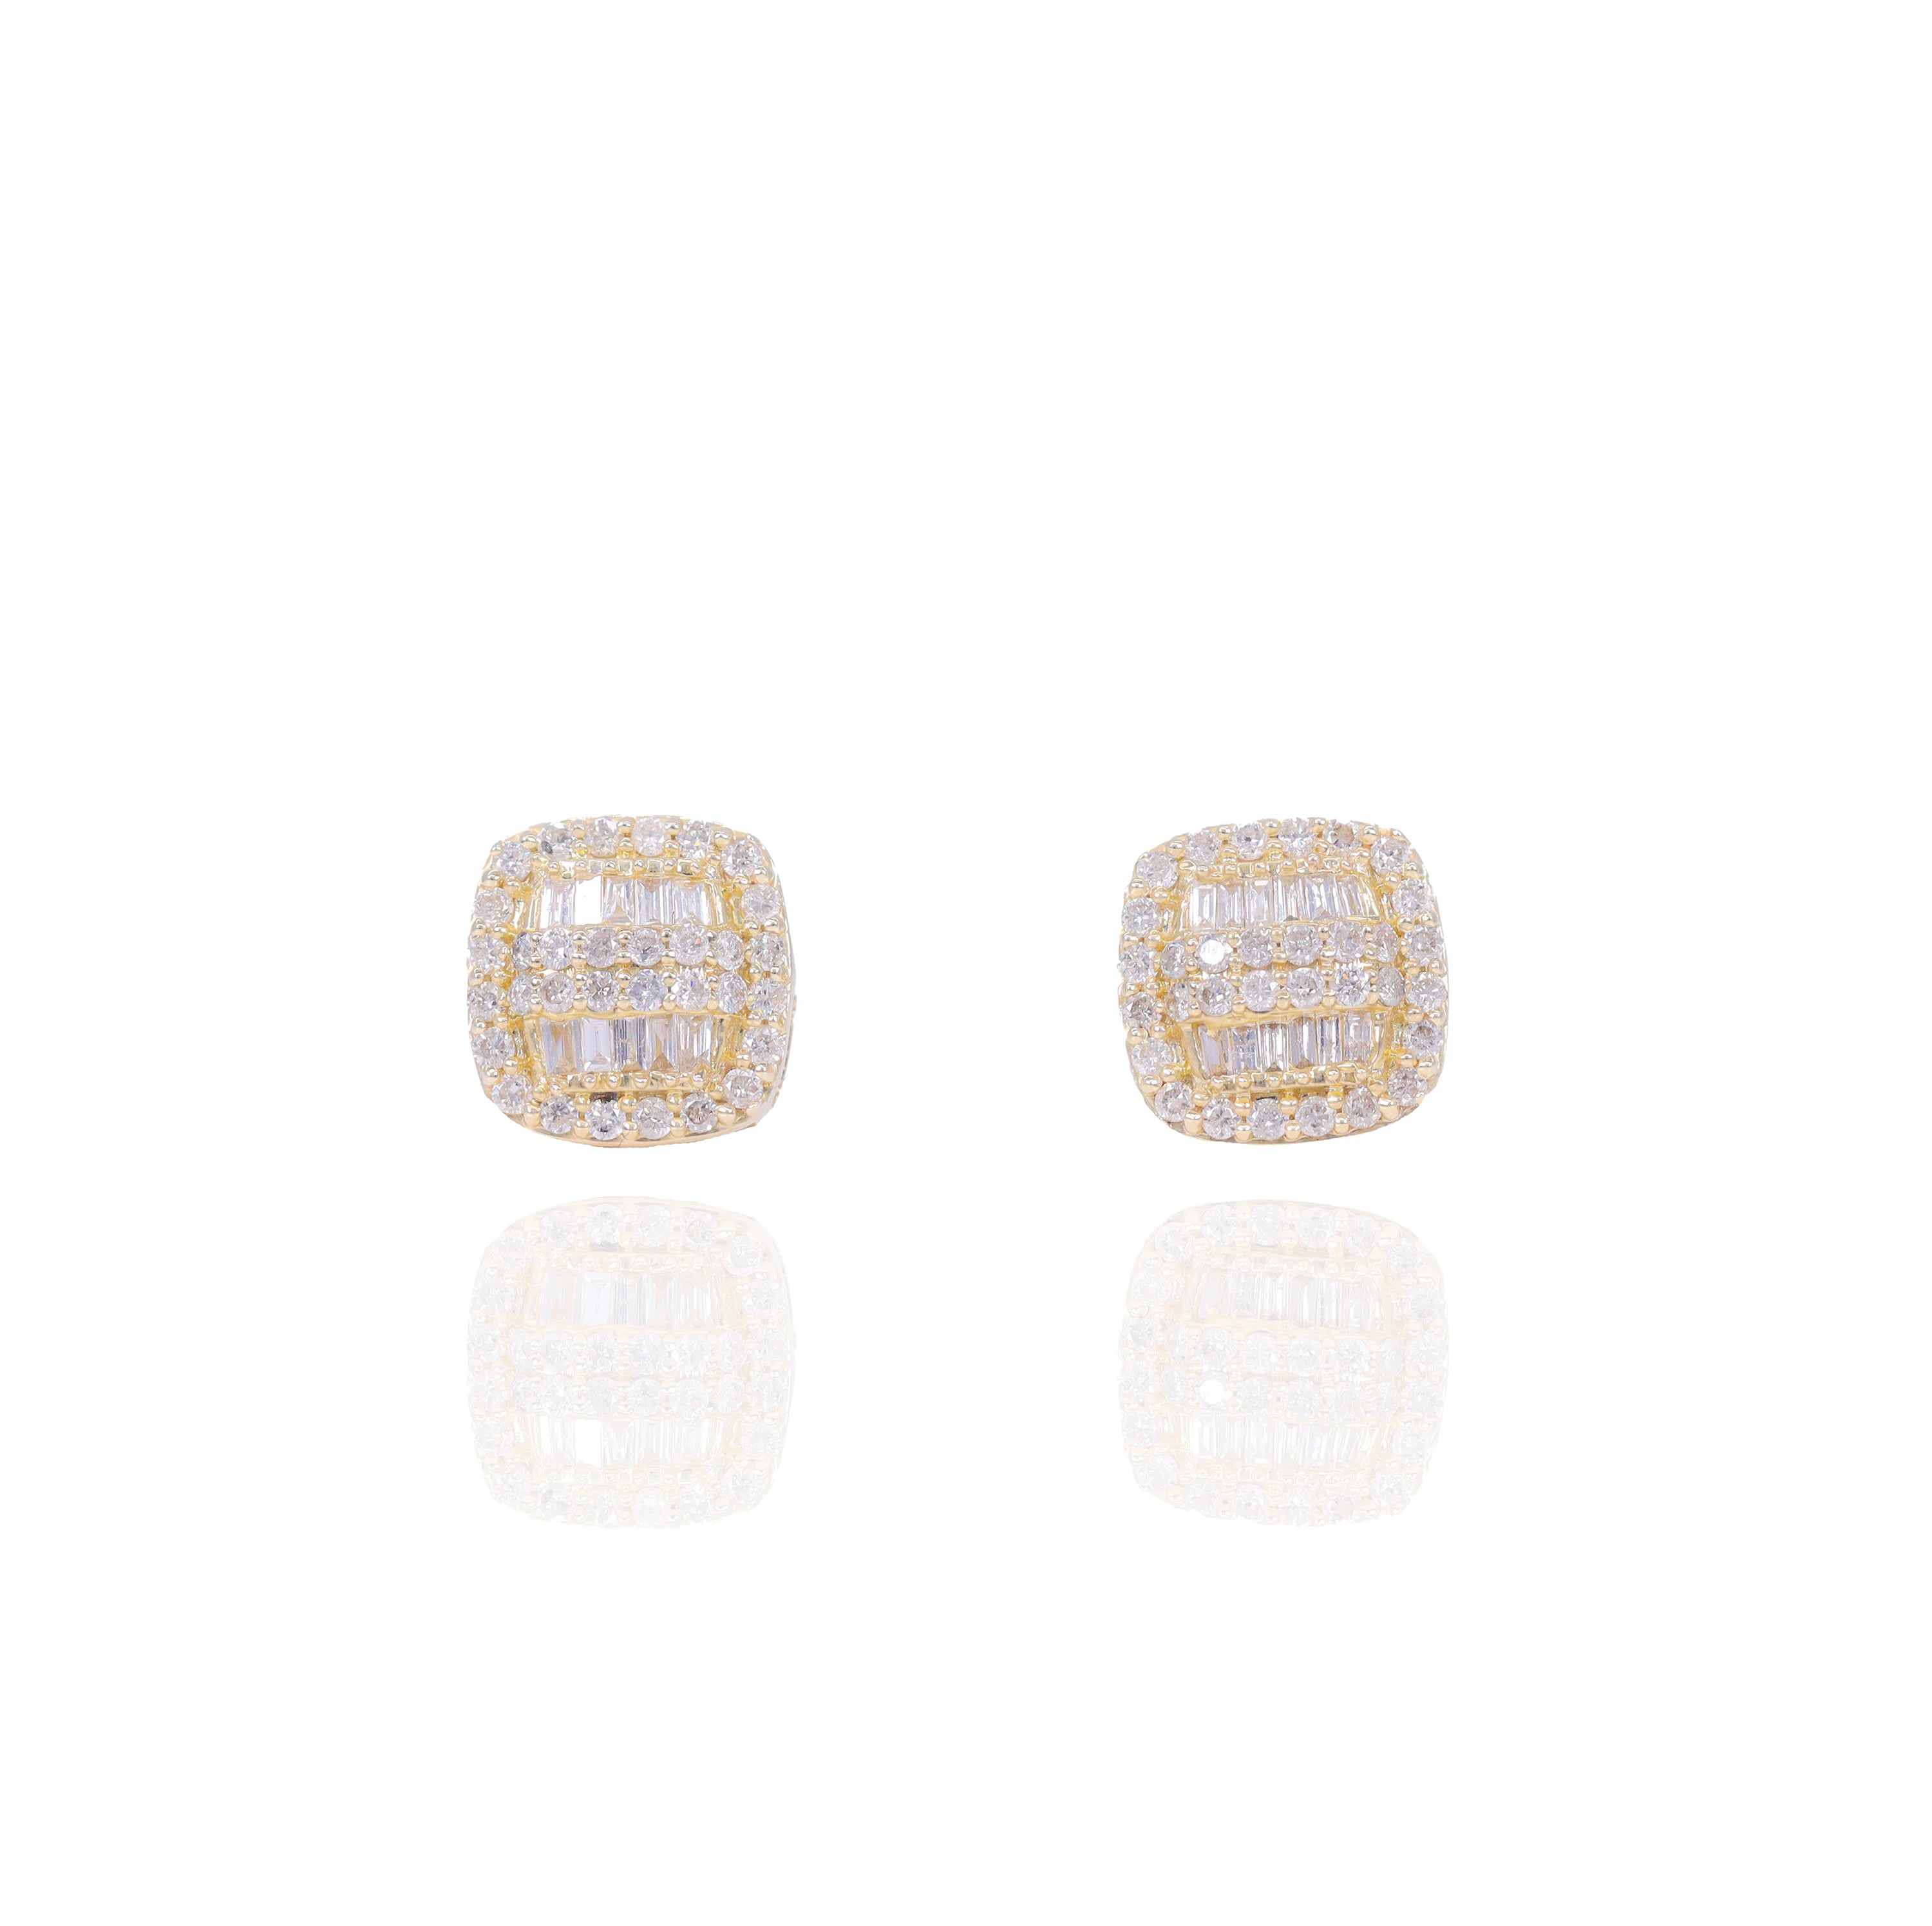 Square 2 Row Baguettes and Round Diamond Earrings